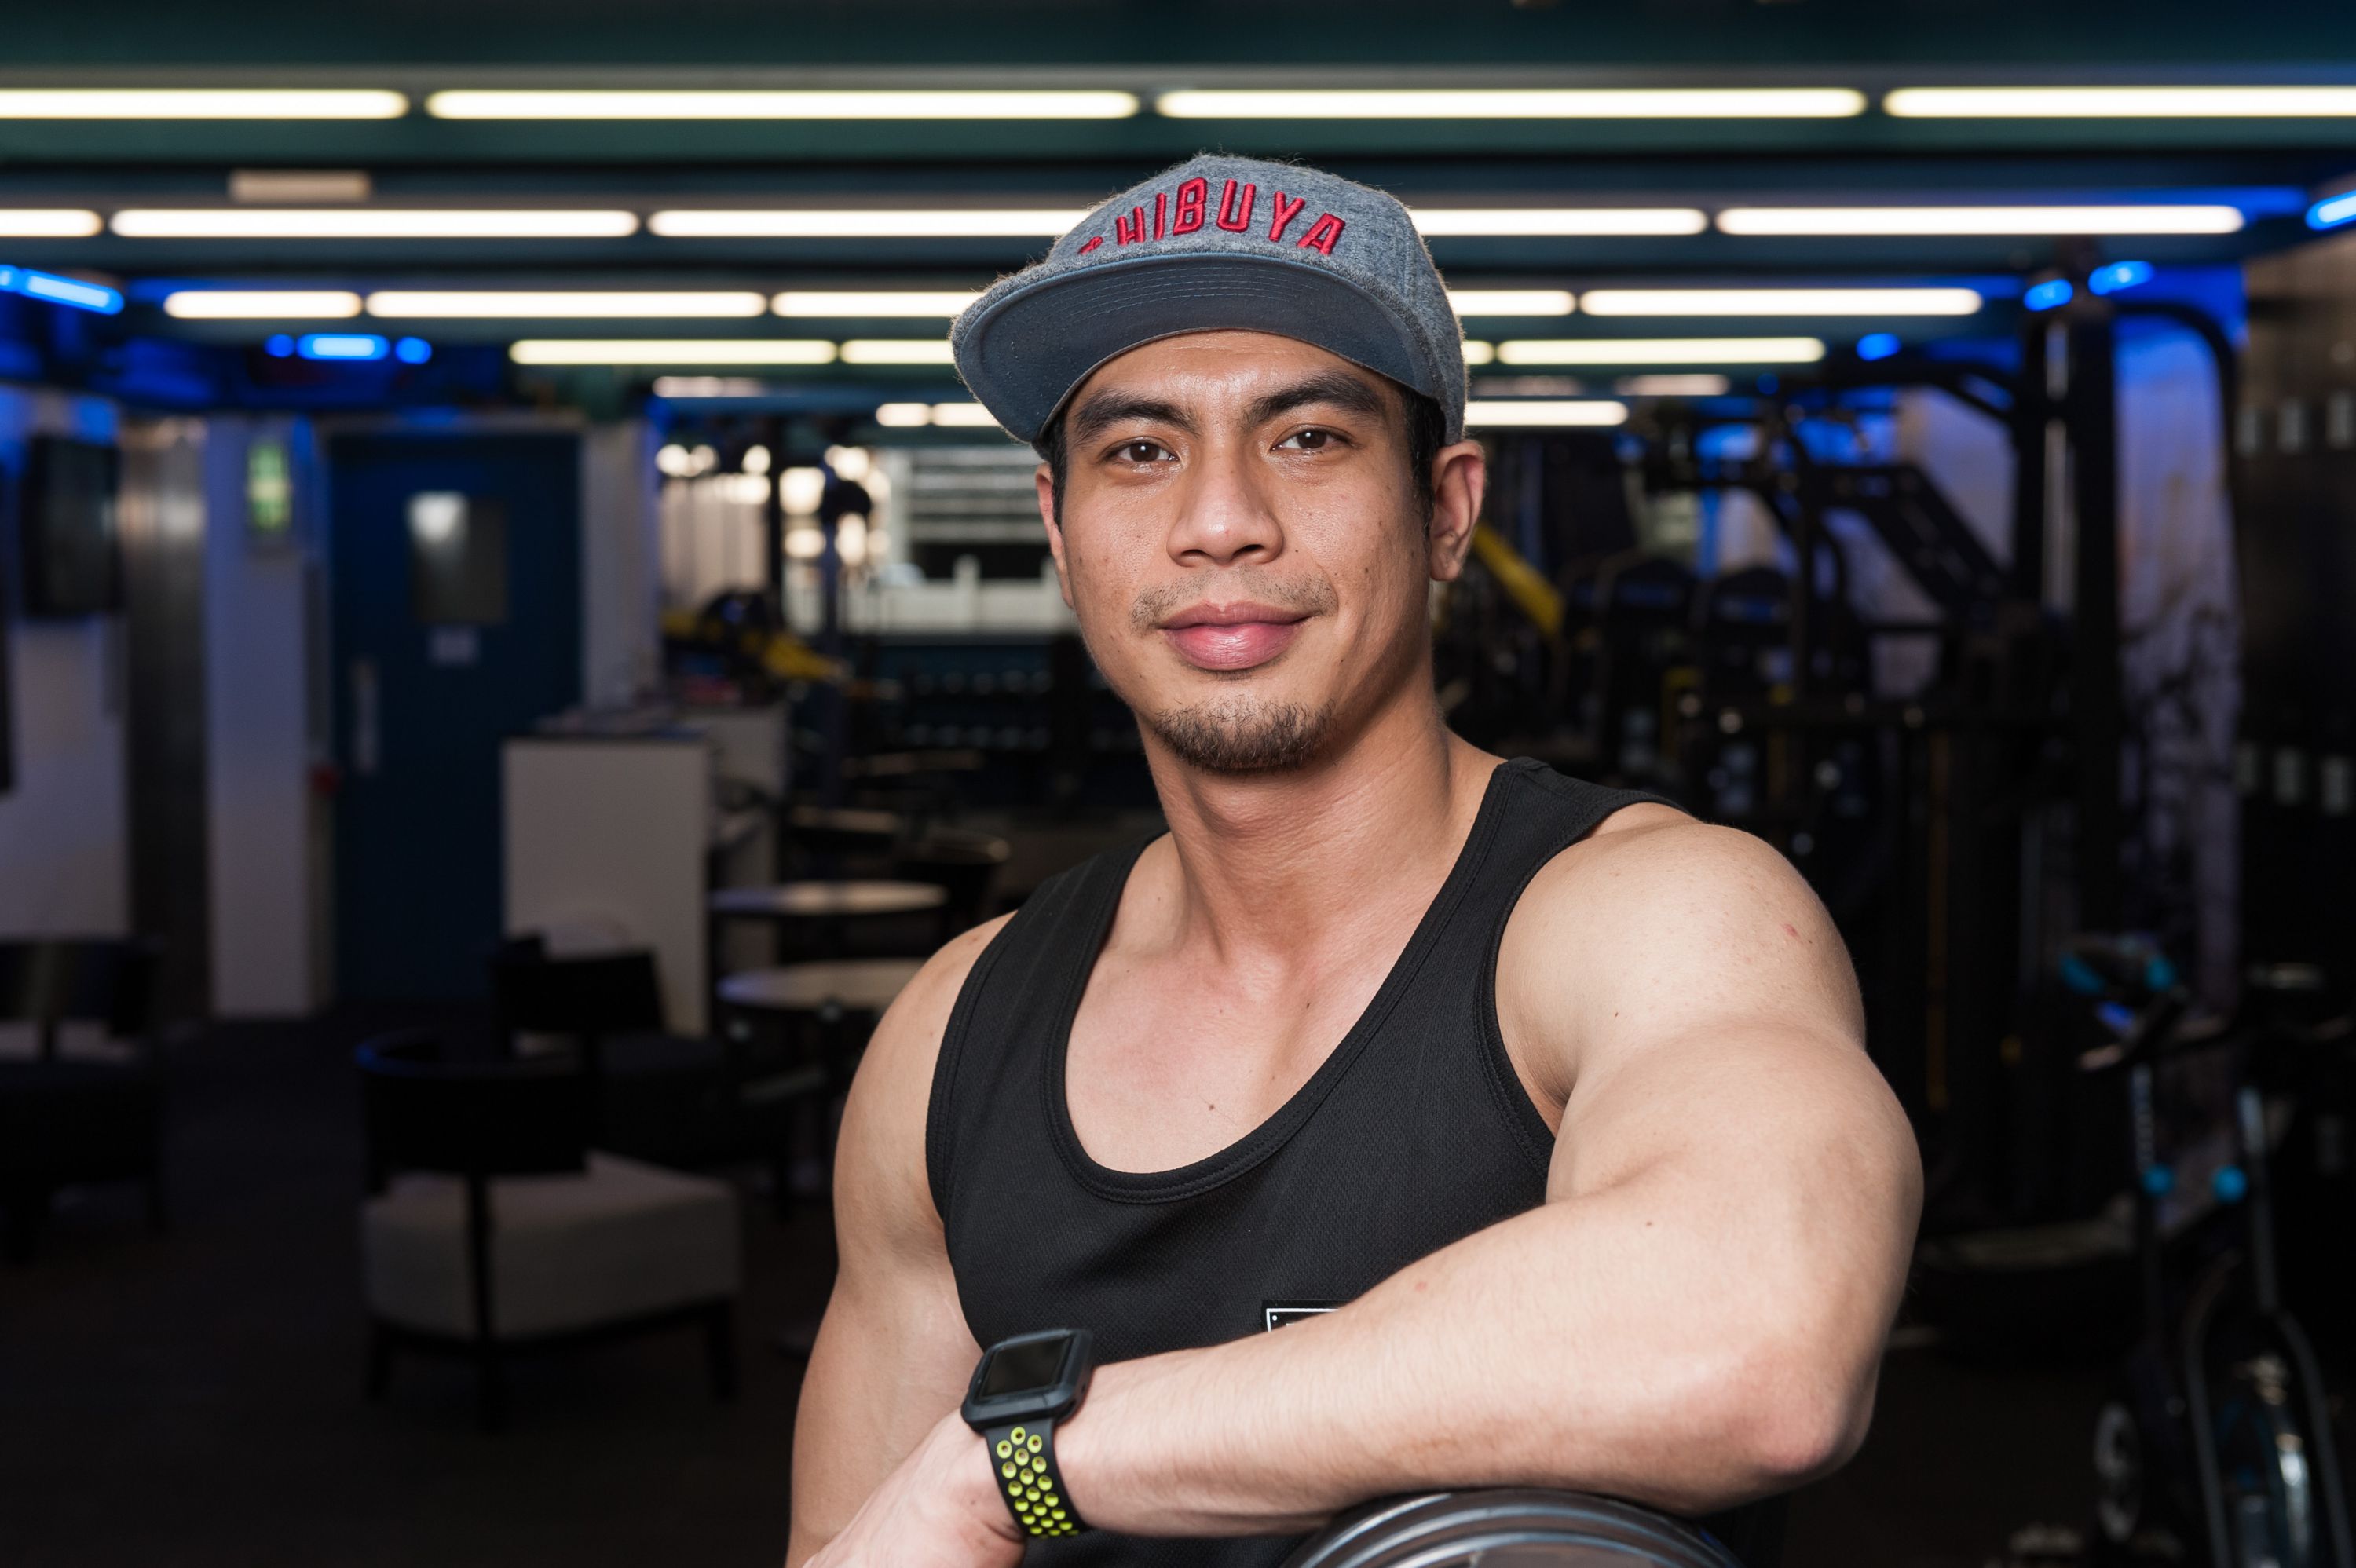 Fitspiration: Louie Manguiat on lifting at Hong Kong’s first 24-hour outdoor gym